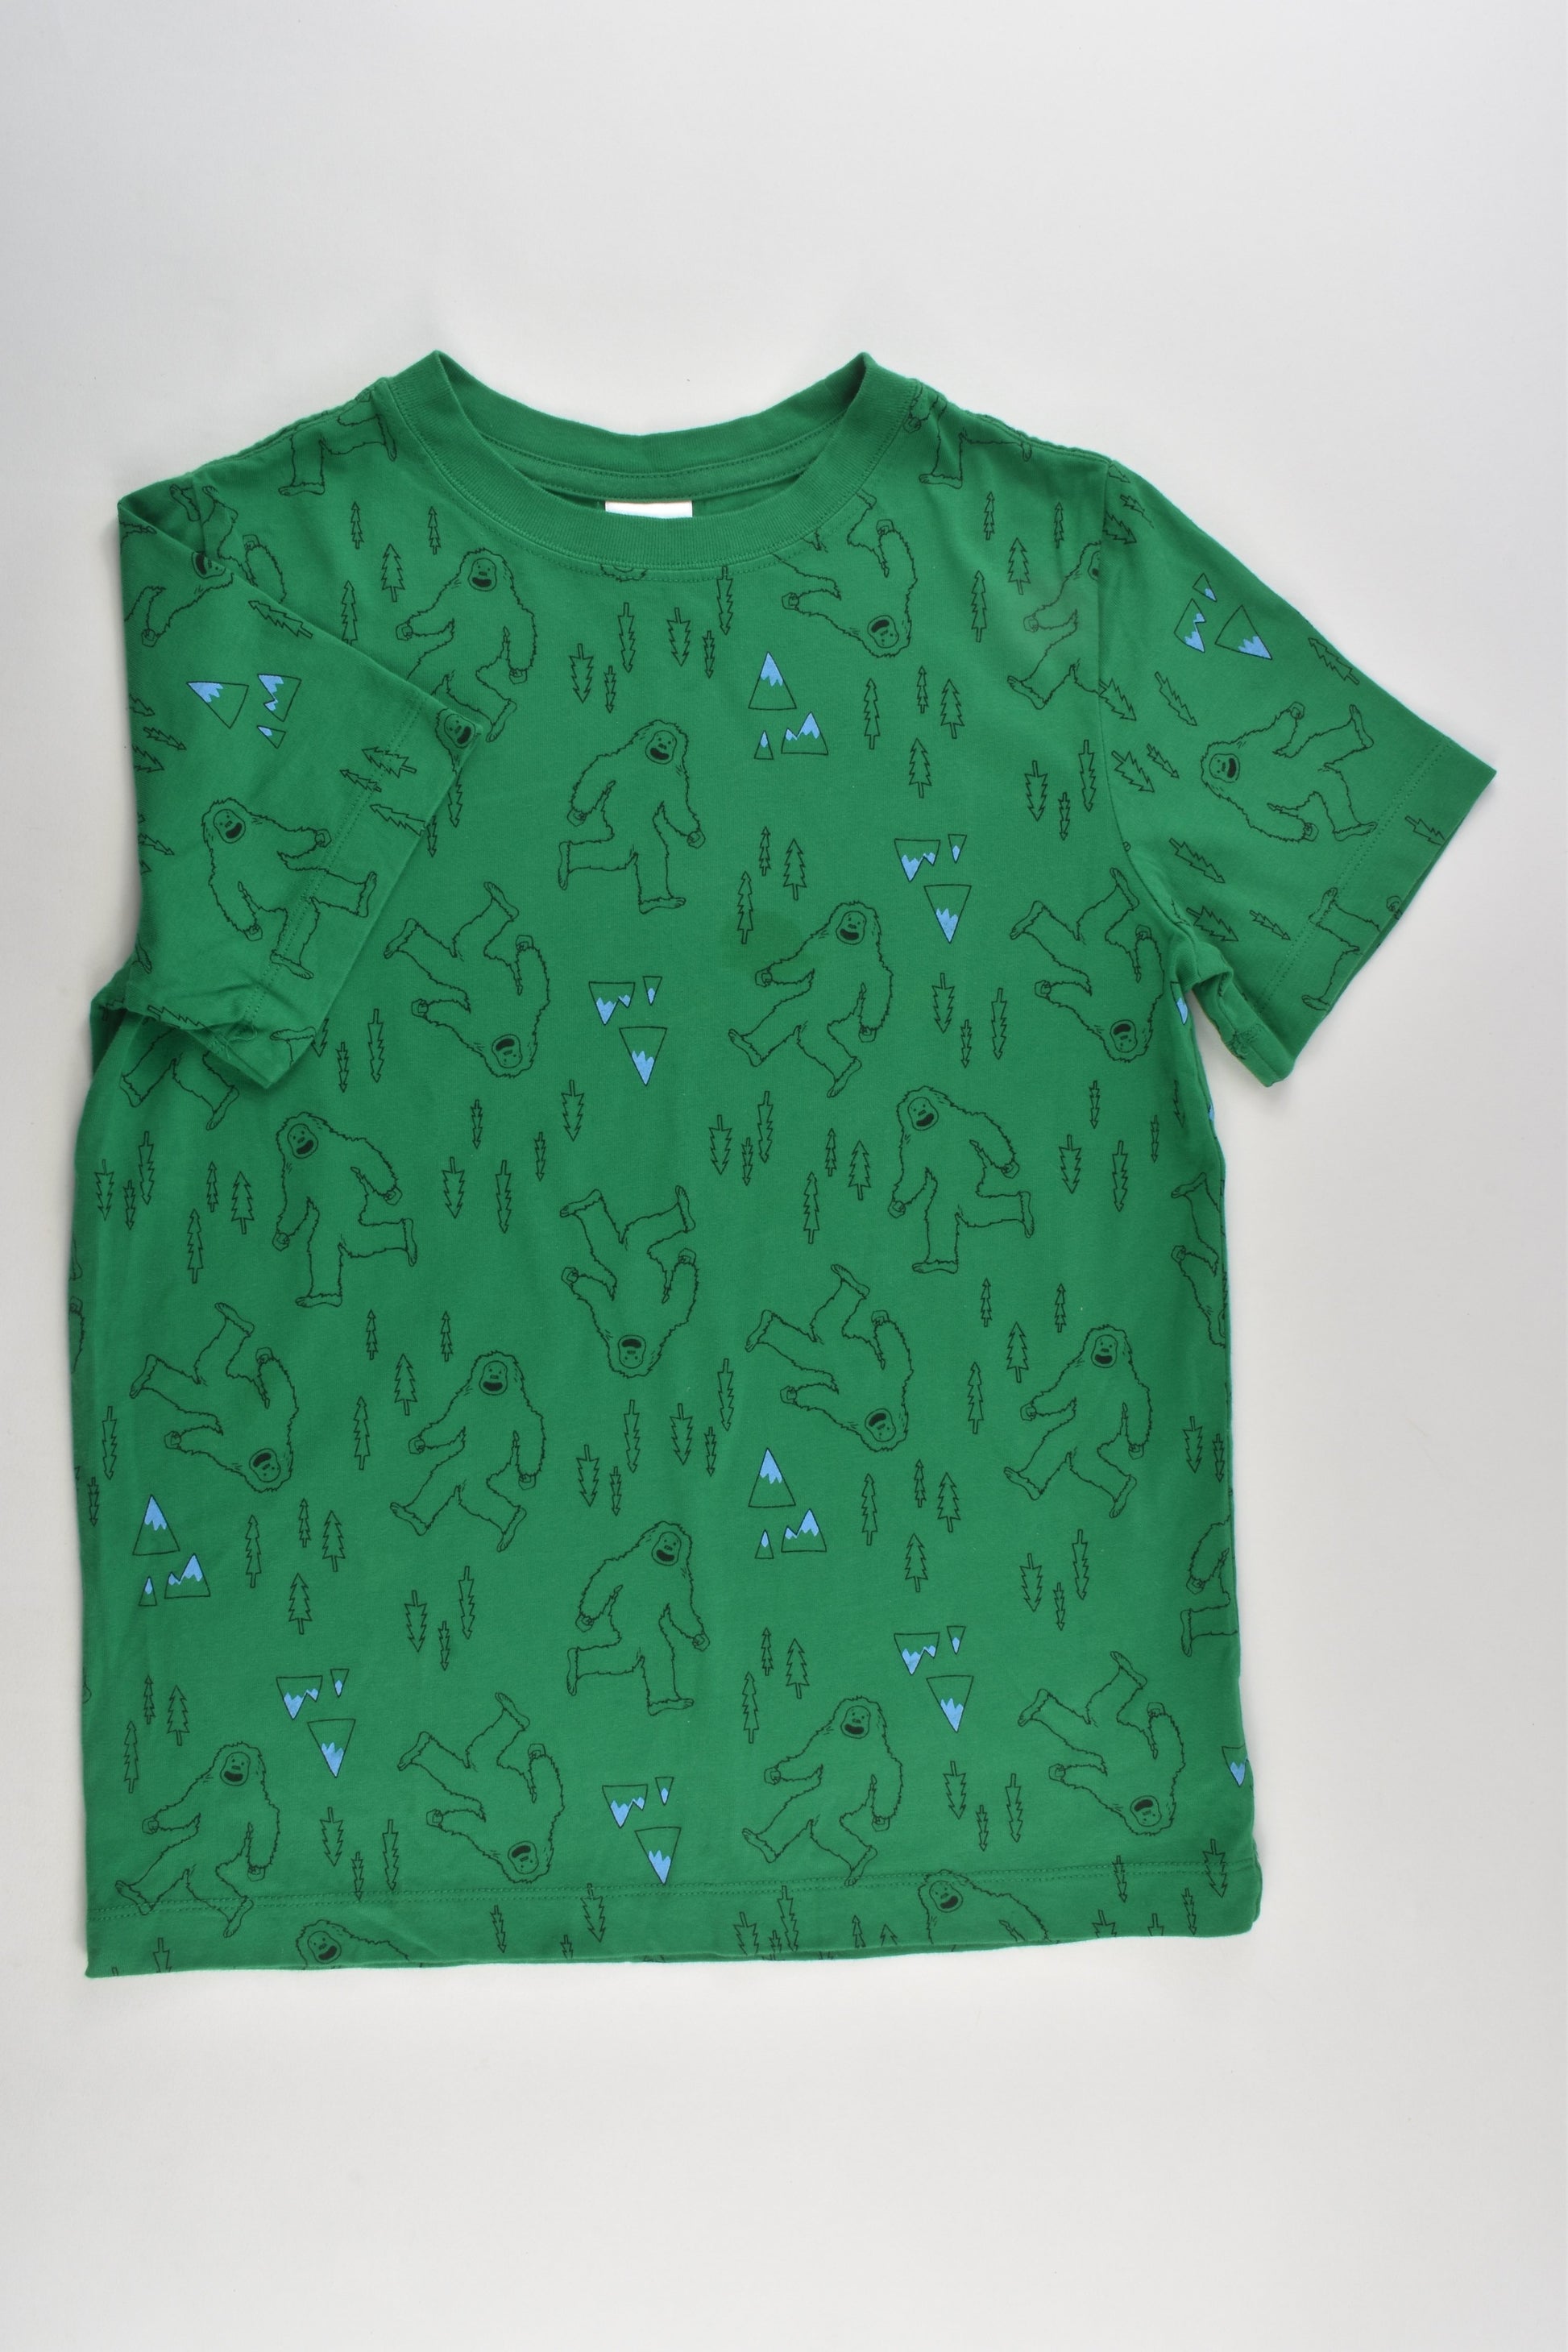 Hanna Andersson Size 8-9 (130 cm, US 8) Snow Monster T-shirt